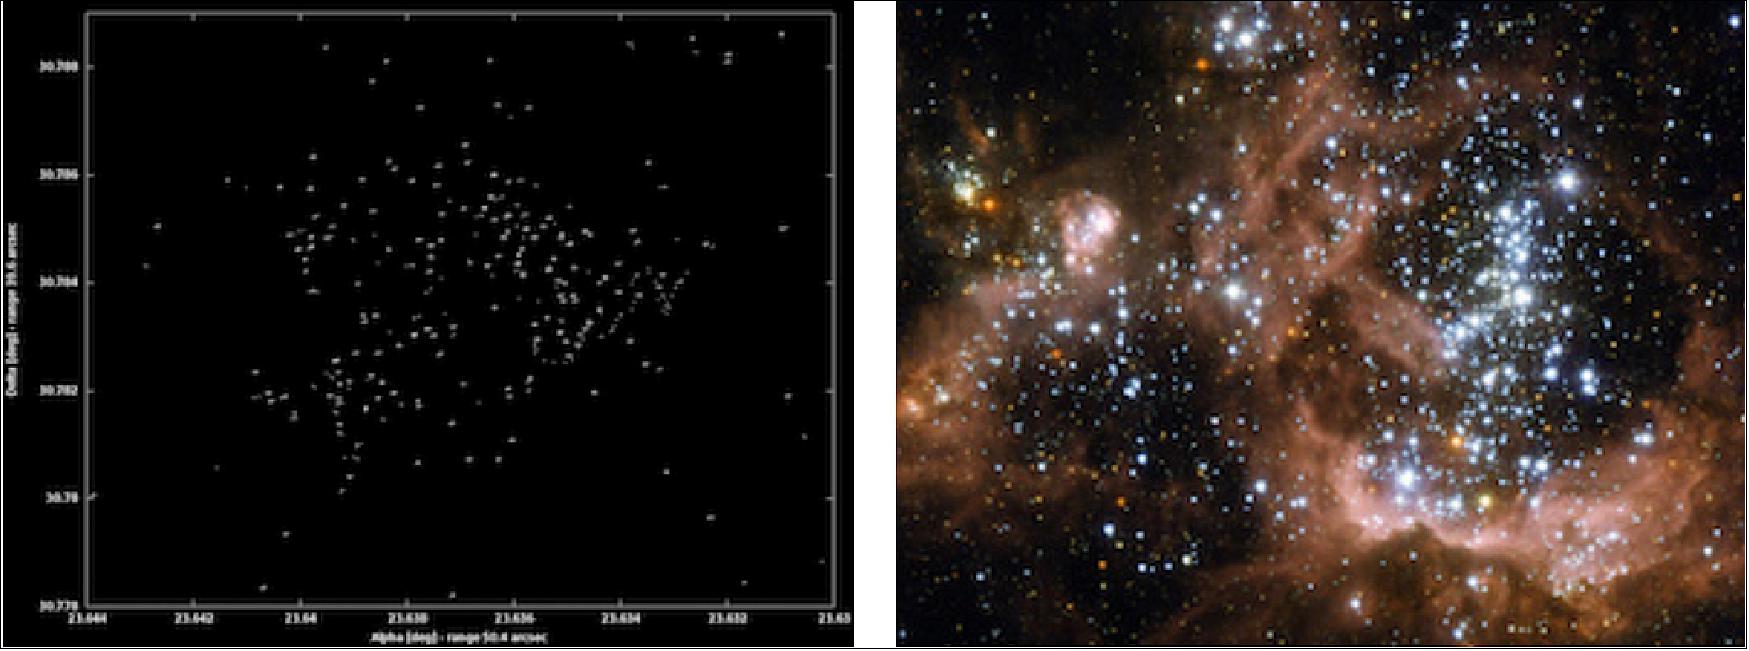 Figure 71: The star forming region NGC 604 viewed by Gaia (left) and Hubble (right), image credit: ESA/Gaia/DPAC (left); ESA/Hubble & NASA (right)